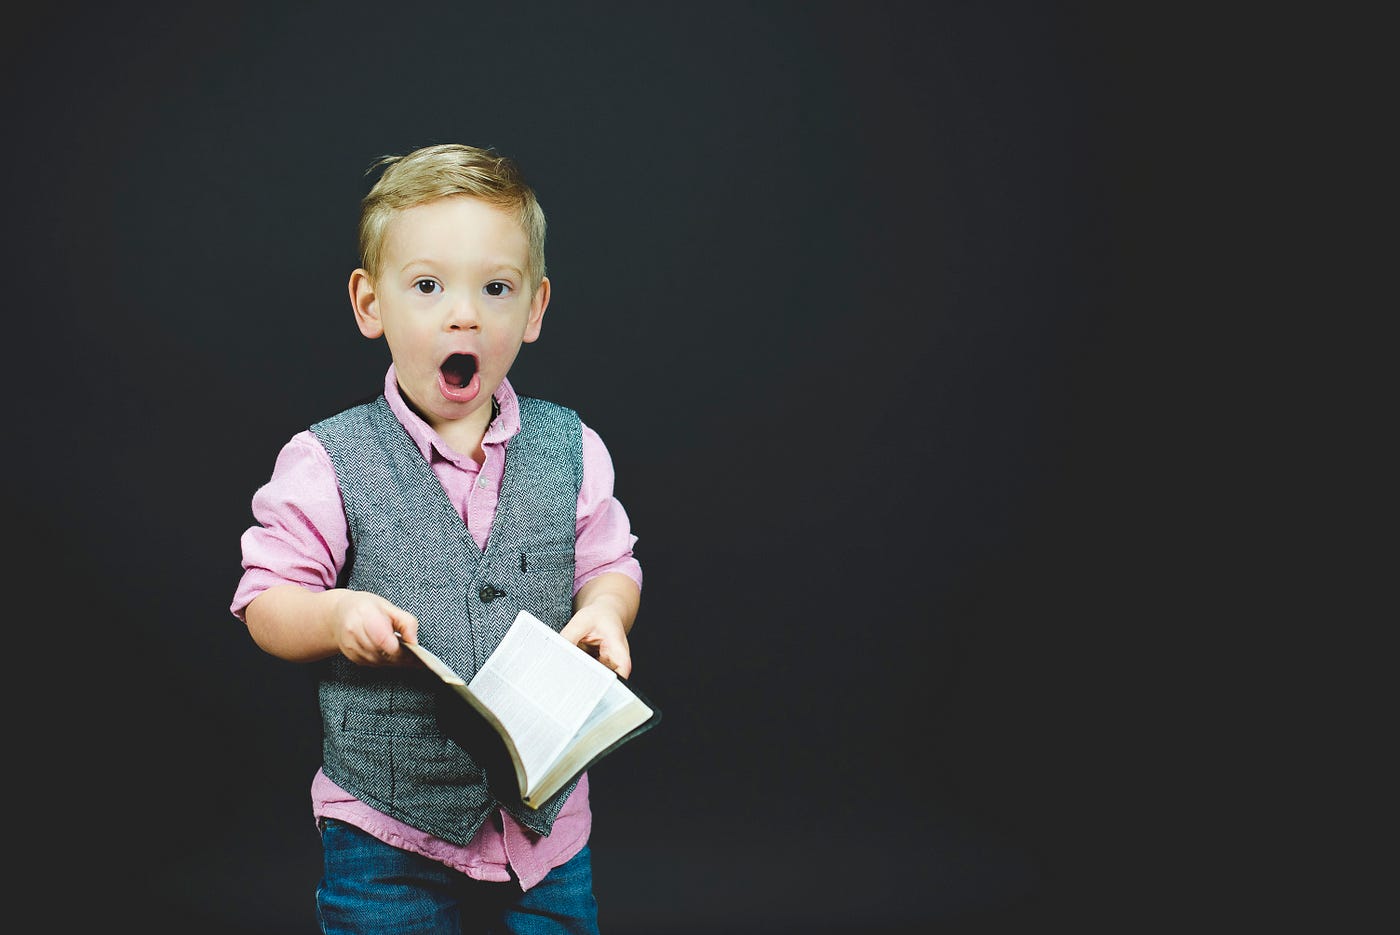 a young child looks happily surprised about information he just received.